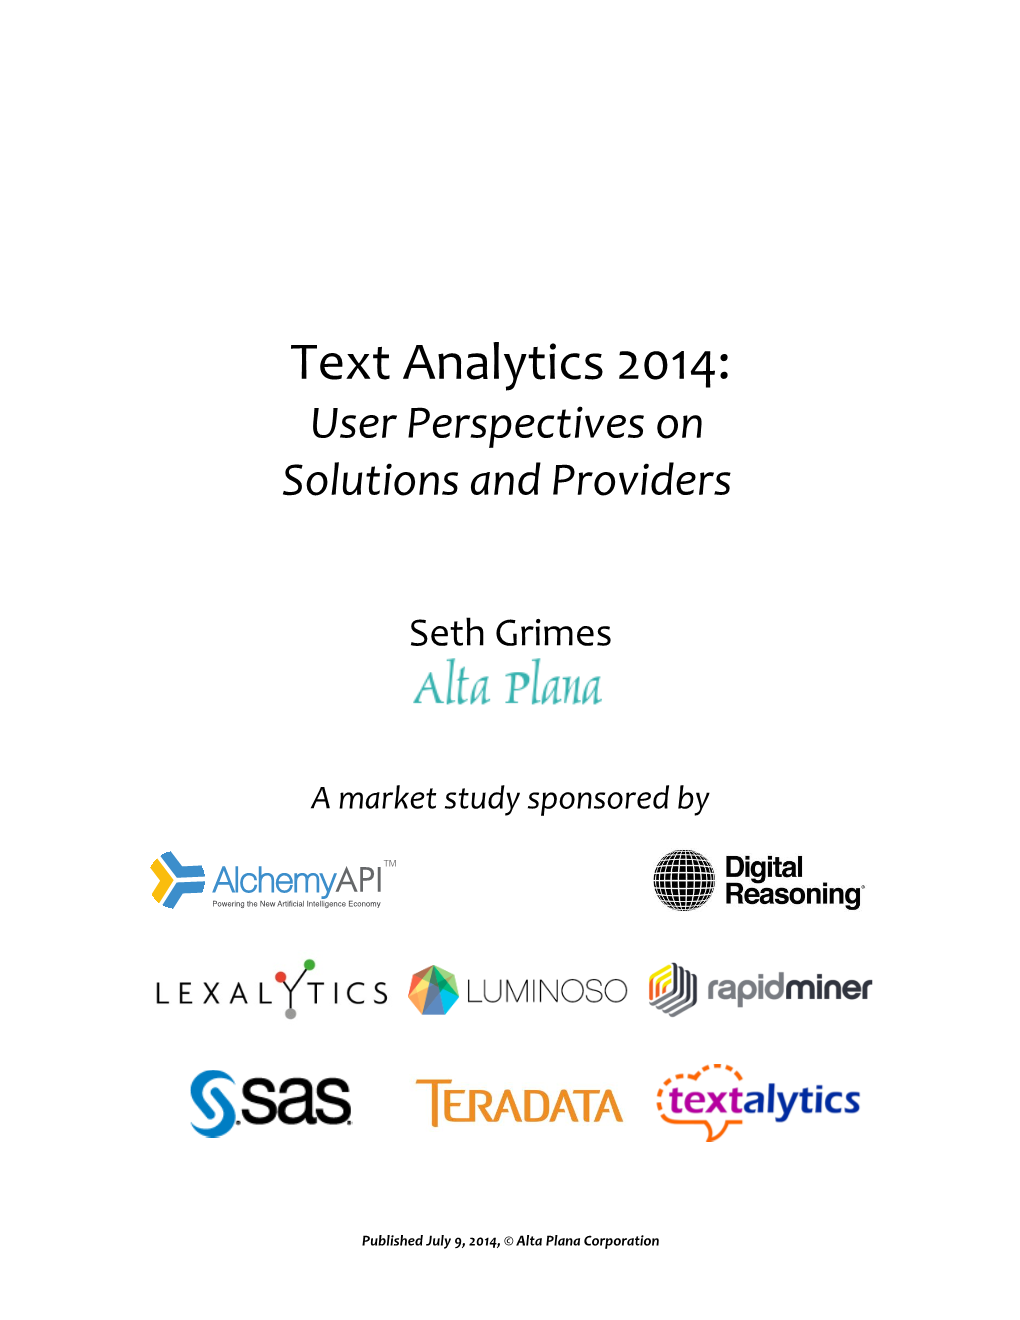 Text Analytics 2014: User Perspectives on Solutions and Providers